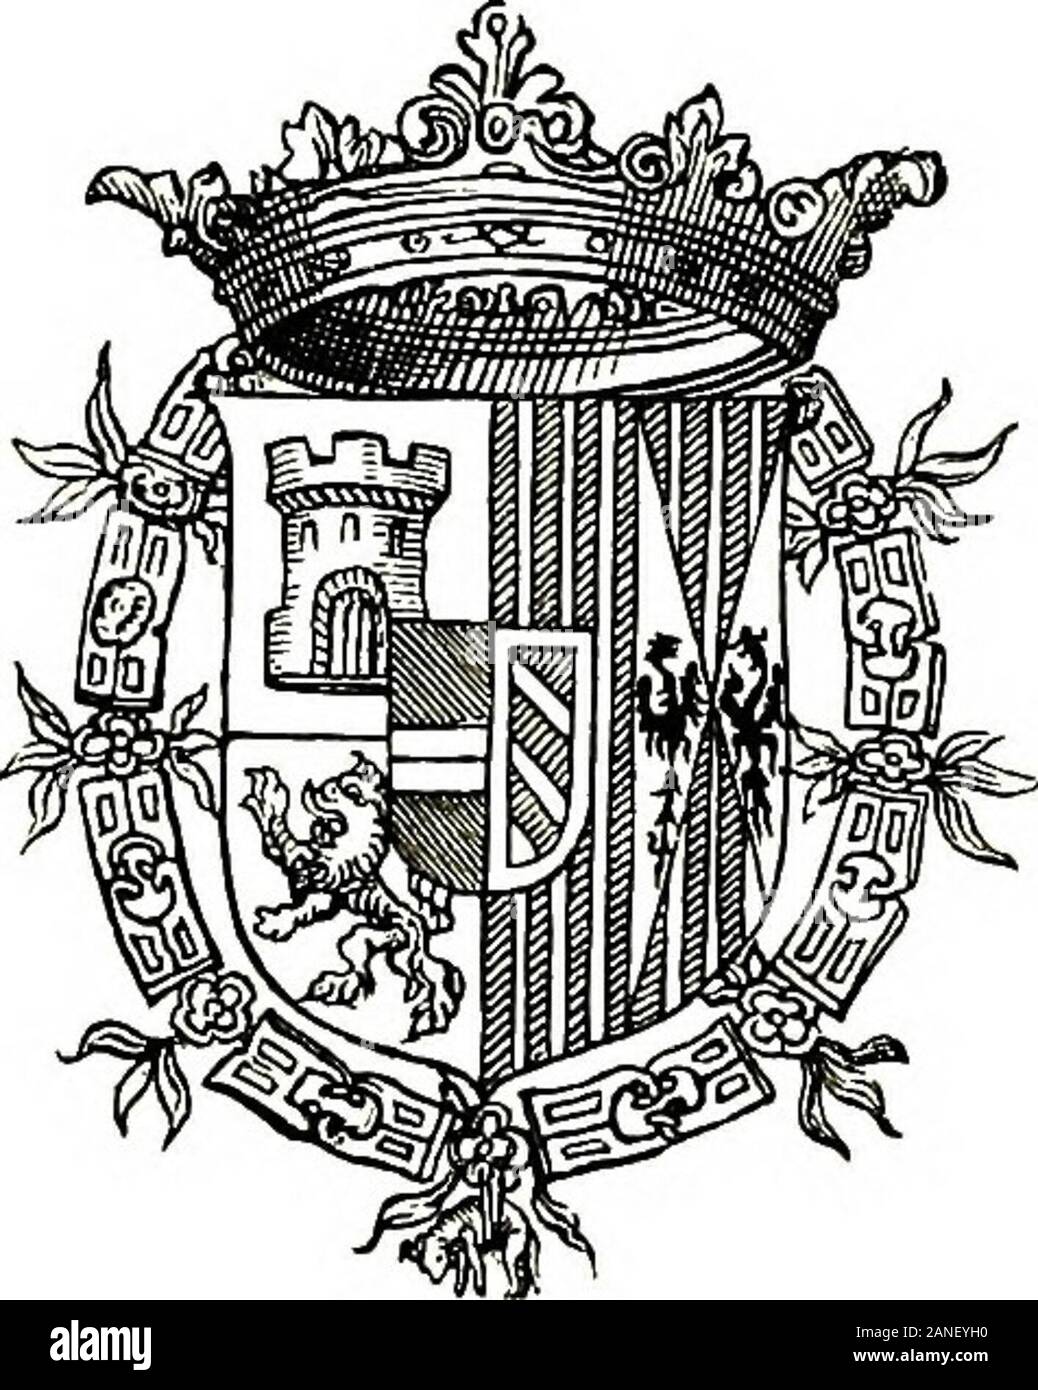 Don John of Austria, or Passages from the history of the sixteenth century, MDXLVIIMDLXXVII . ARMS OF DON JOHN. adherents of the various reformed sects saw in him their soleprotector against renewed persecution. The Provinces of Hollandand Zeland, uniting themselves by closer ties, conferred upon himfuller powers. His envoys, both in London and Paris, wereenabled to point not only to the dangers which threatened him,but also to the confidence which the people of the Netherlandsreposed in him. Both Elizabeth and Henry entered into moreserious negotiations than they had yet ventured to open. The Stock Photo